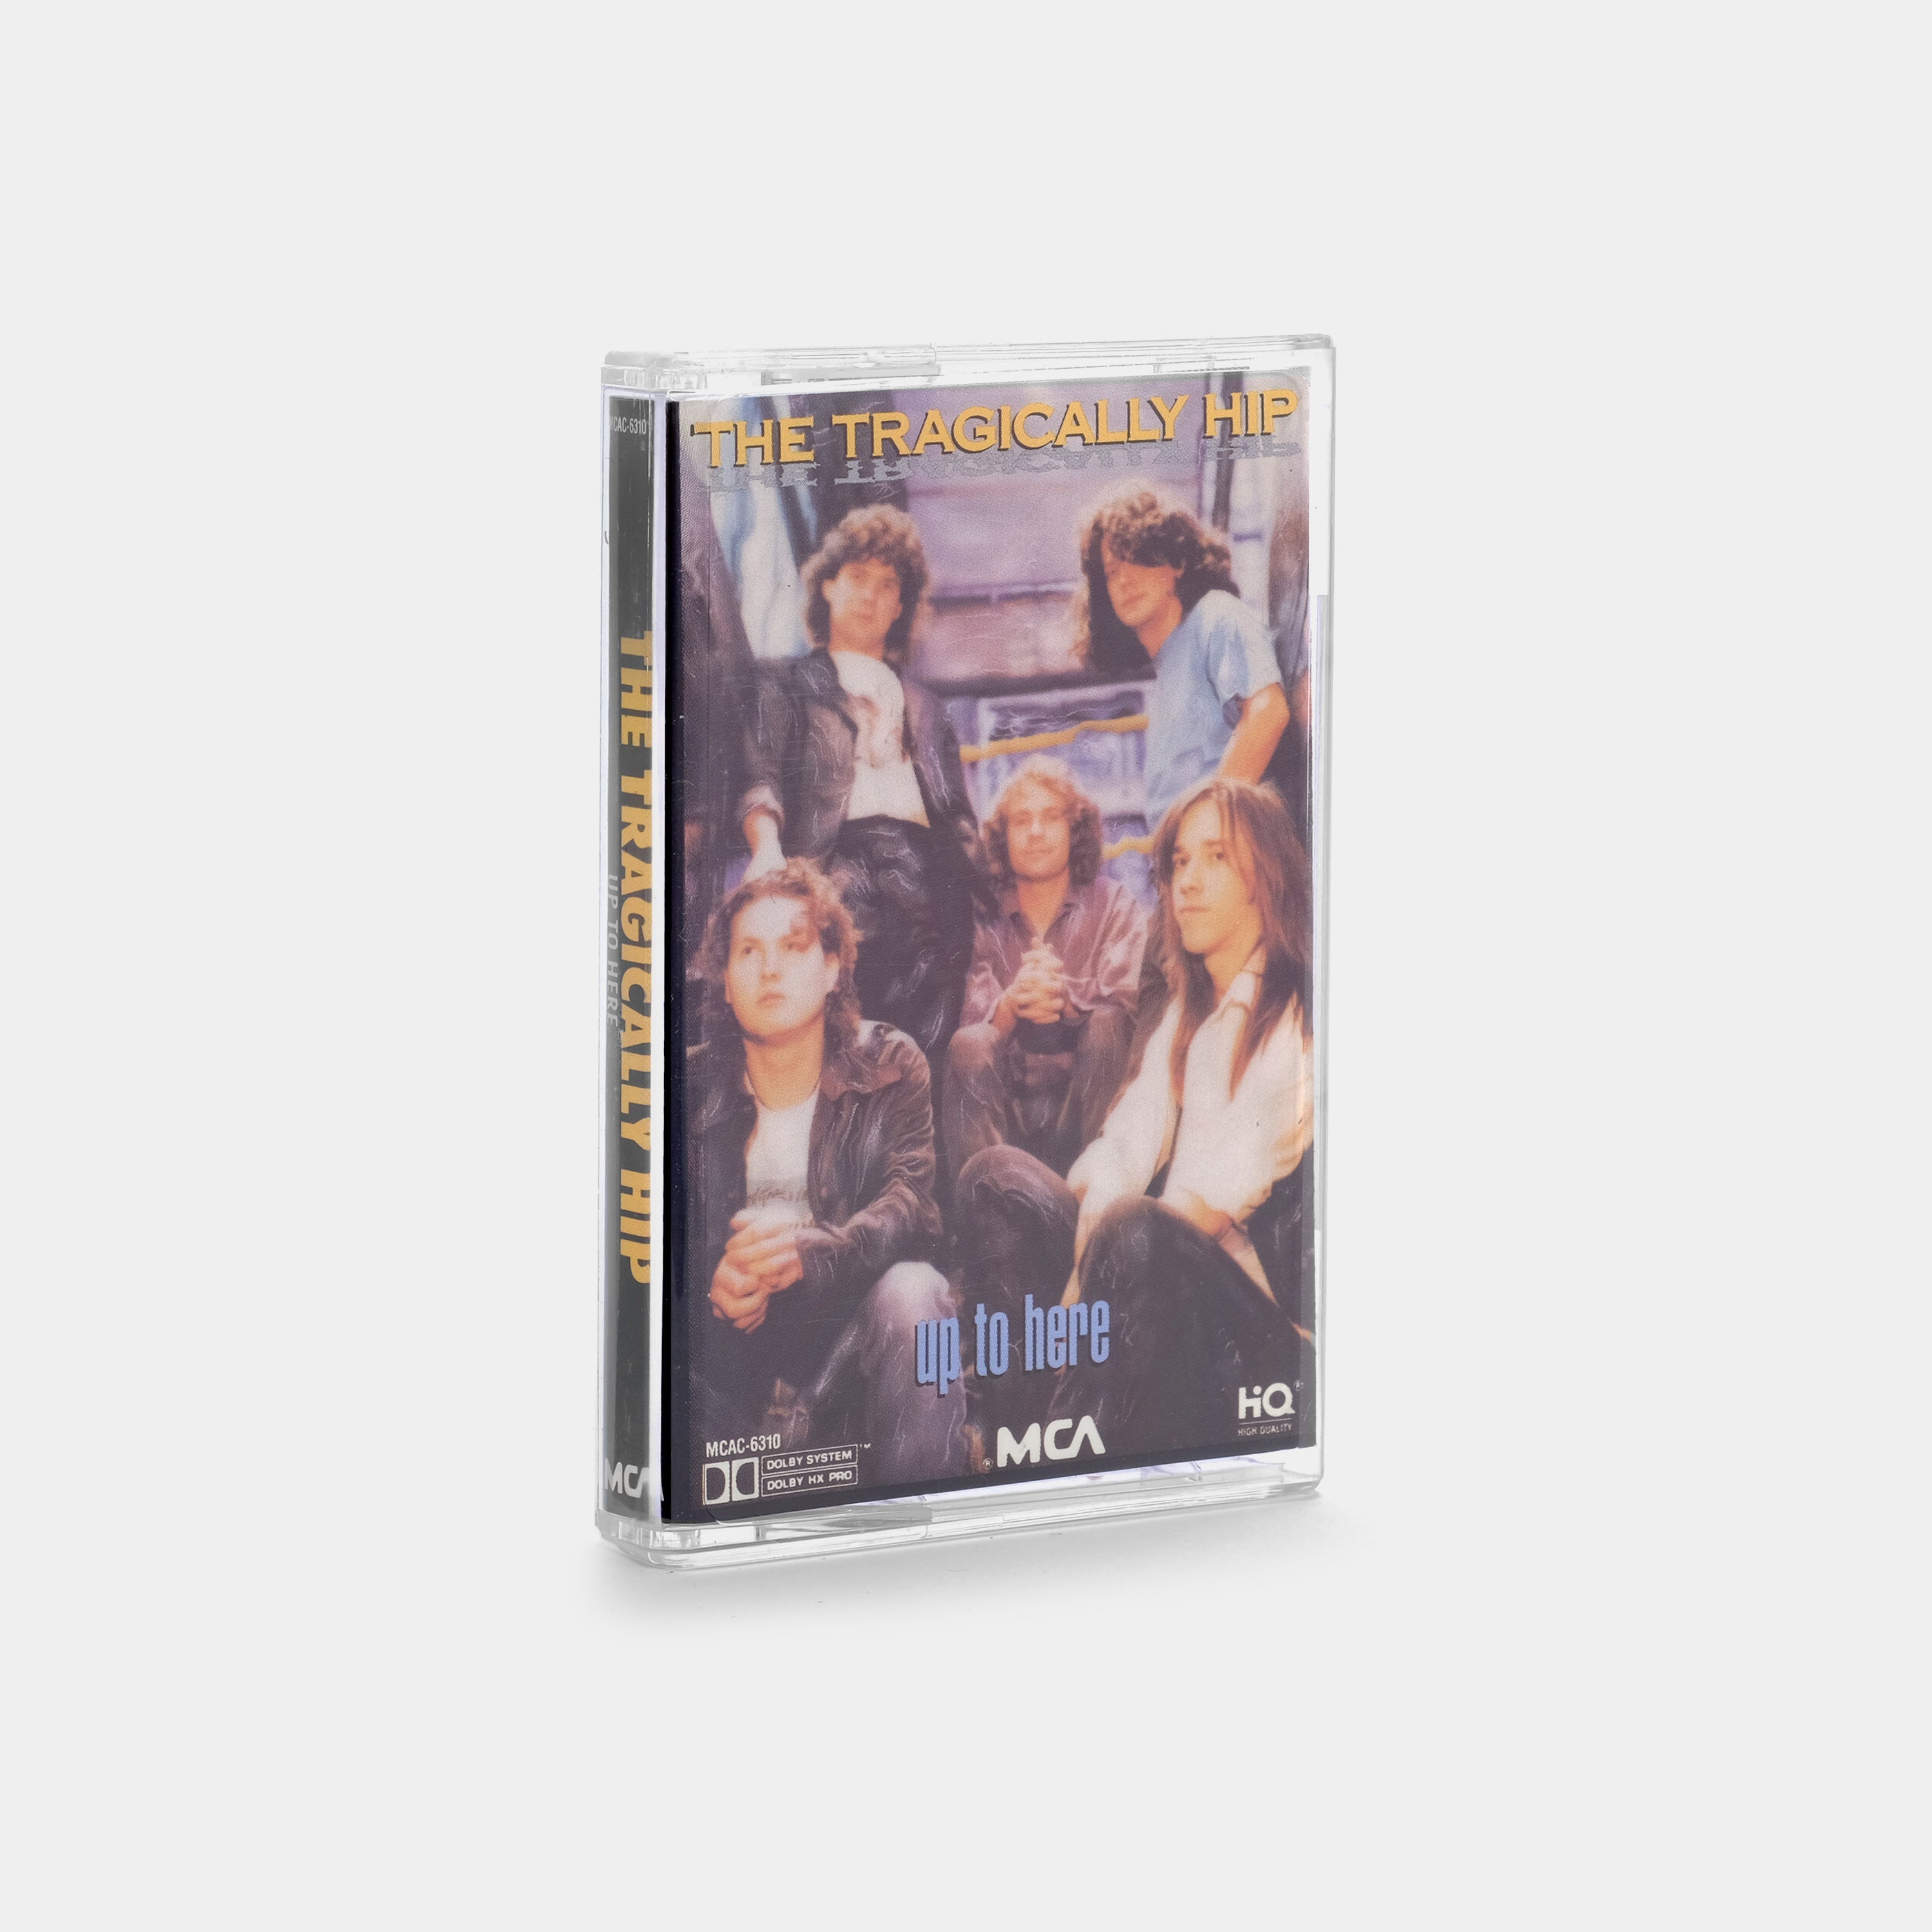 The Tragically Hip - Up To Here Cassette Tape